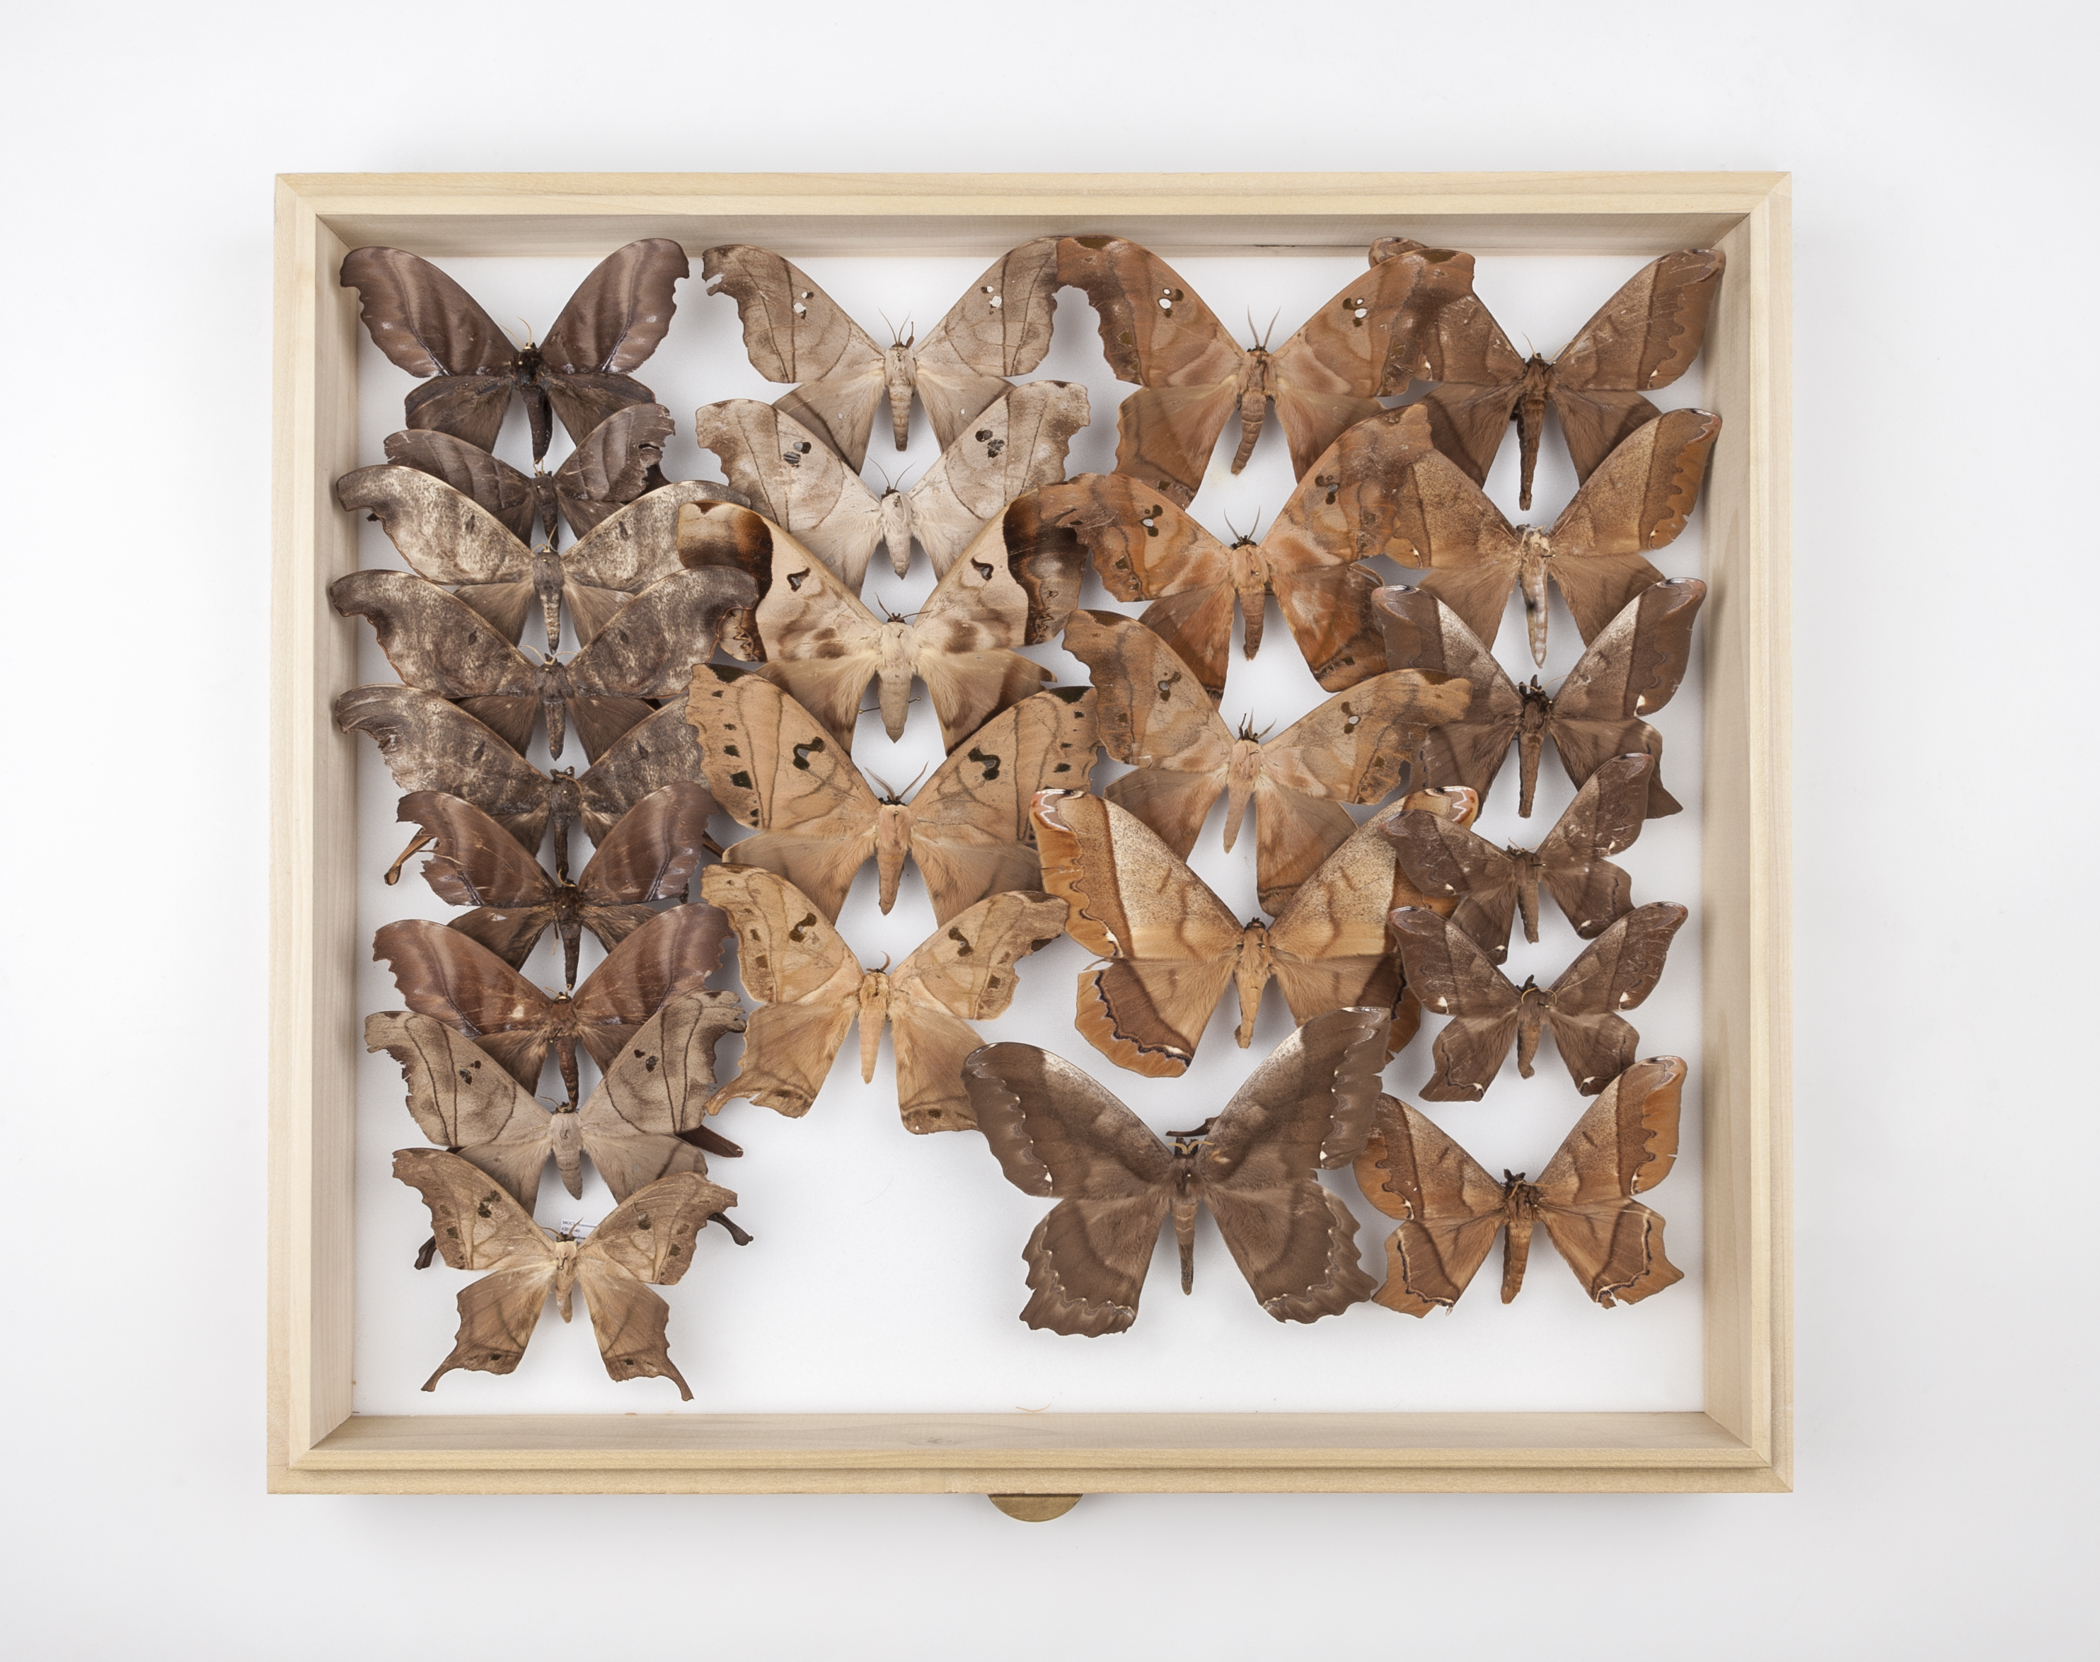 40 years of friendship, 70,000 specimens Amateur entomologists donate lifetimes worth of butterflies and moths pic